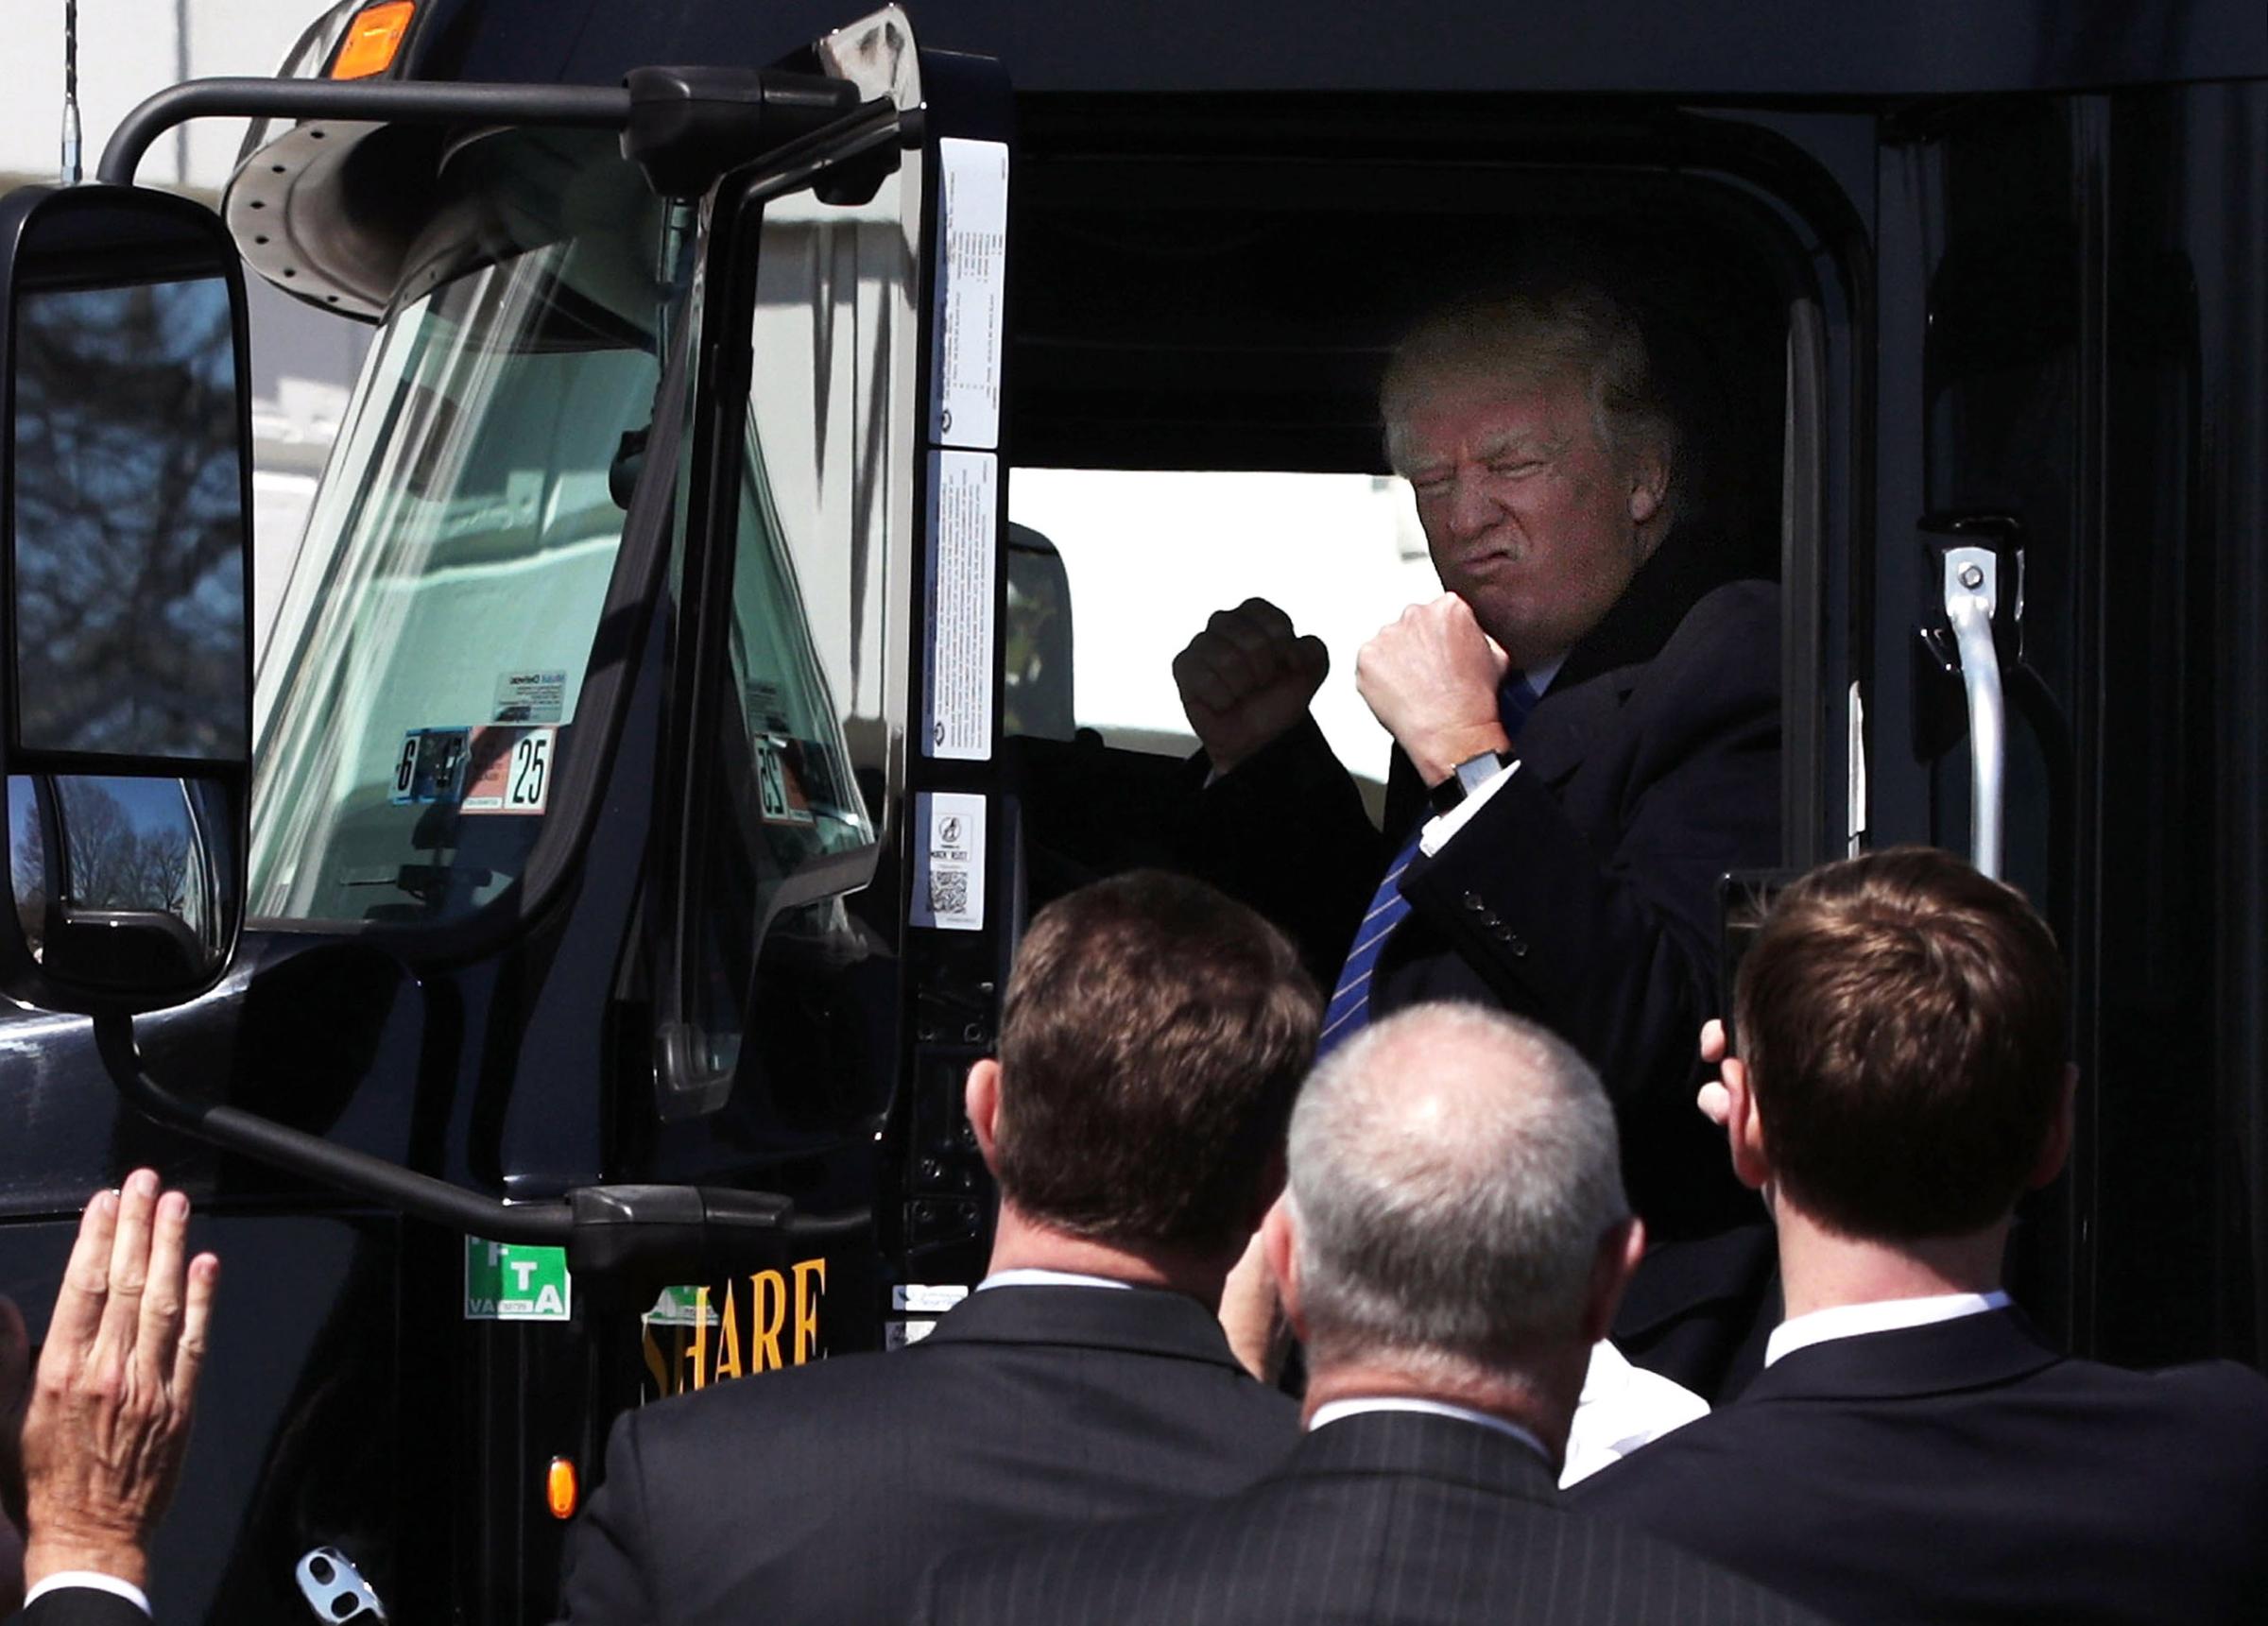 U.S. President Donald Trump sits in the cab of a truck as he welcomes members of American Trucking Associations to the White House March 23, 2017 in Washington, DC.